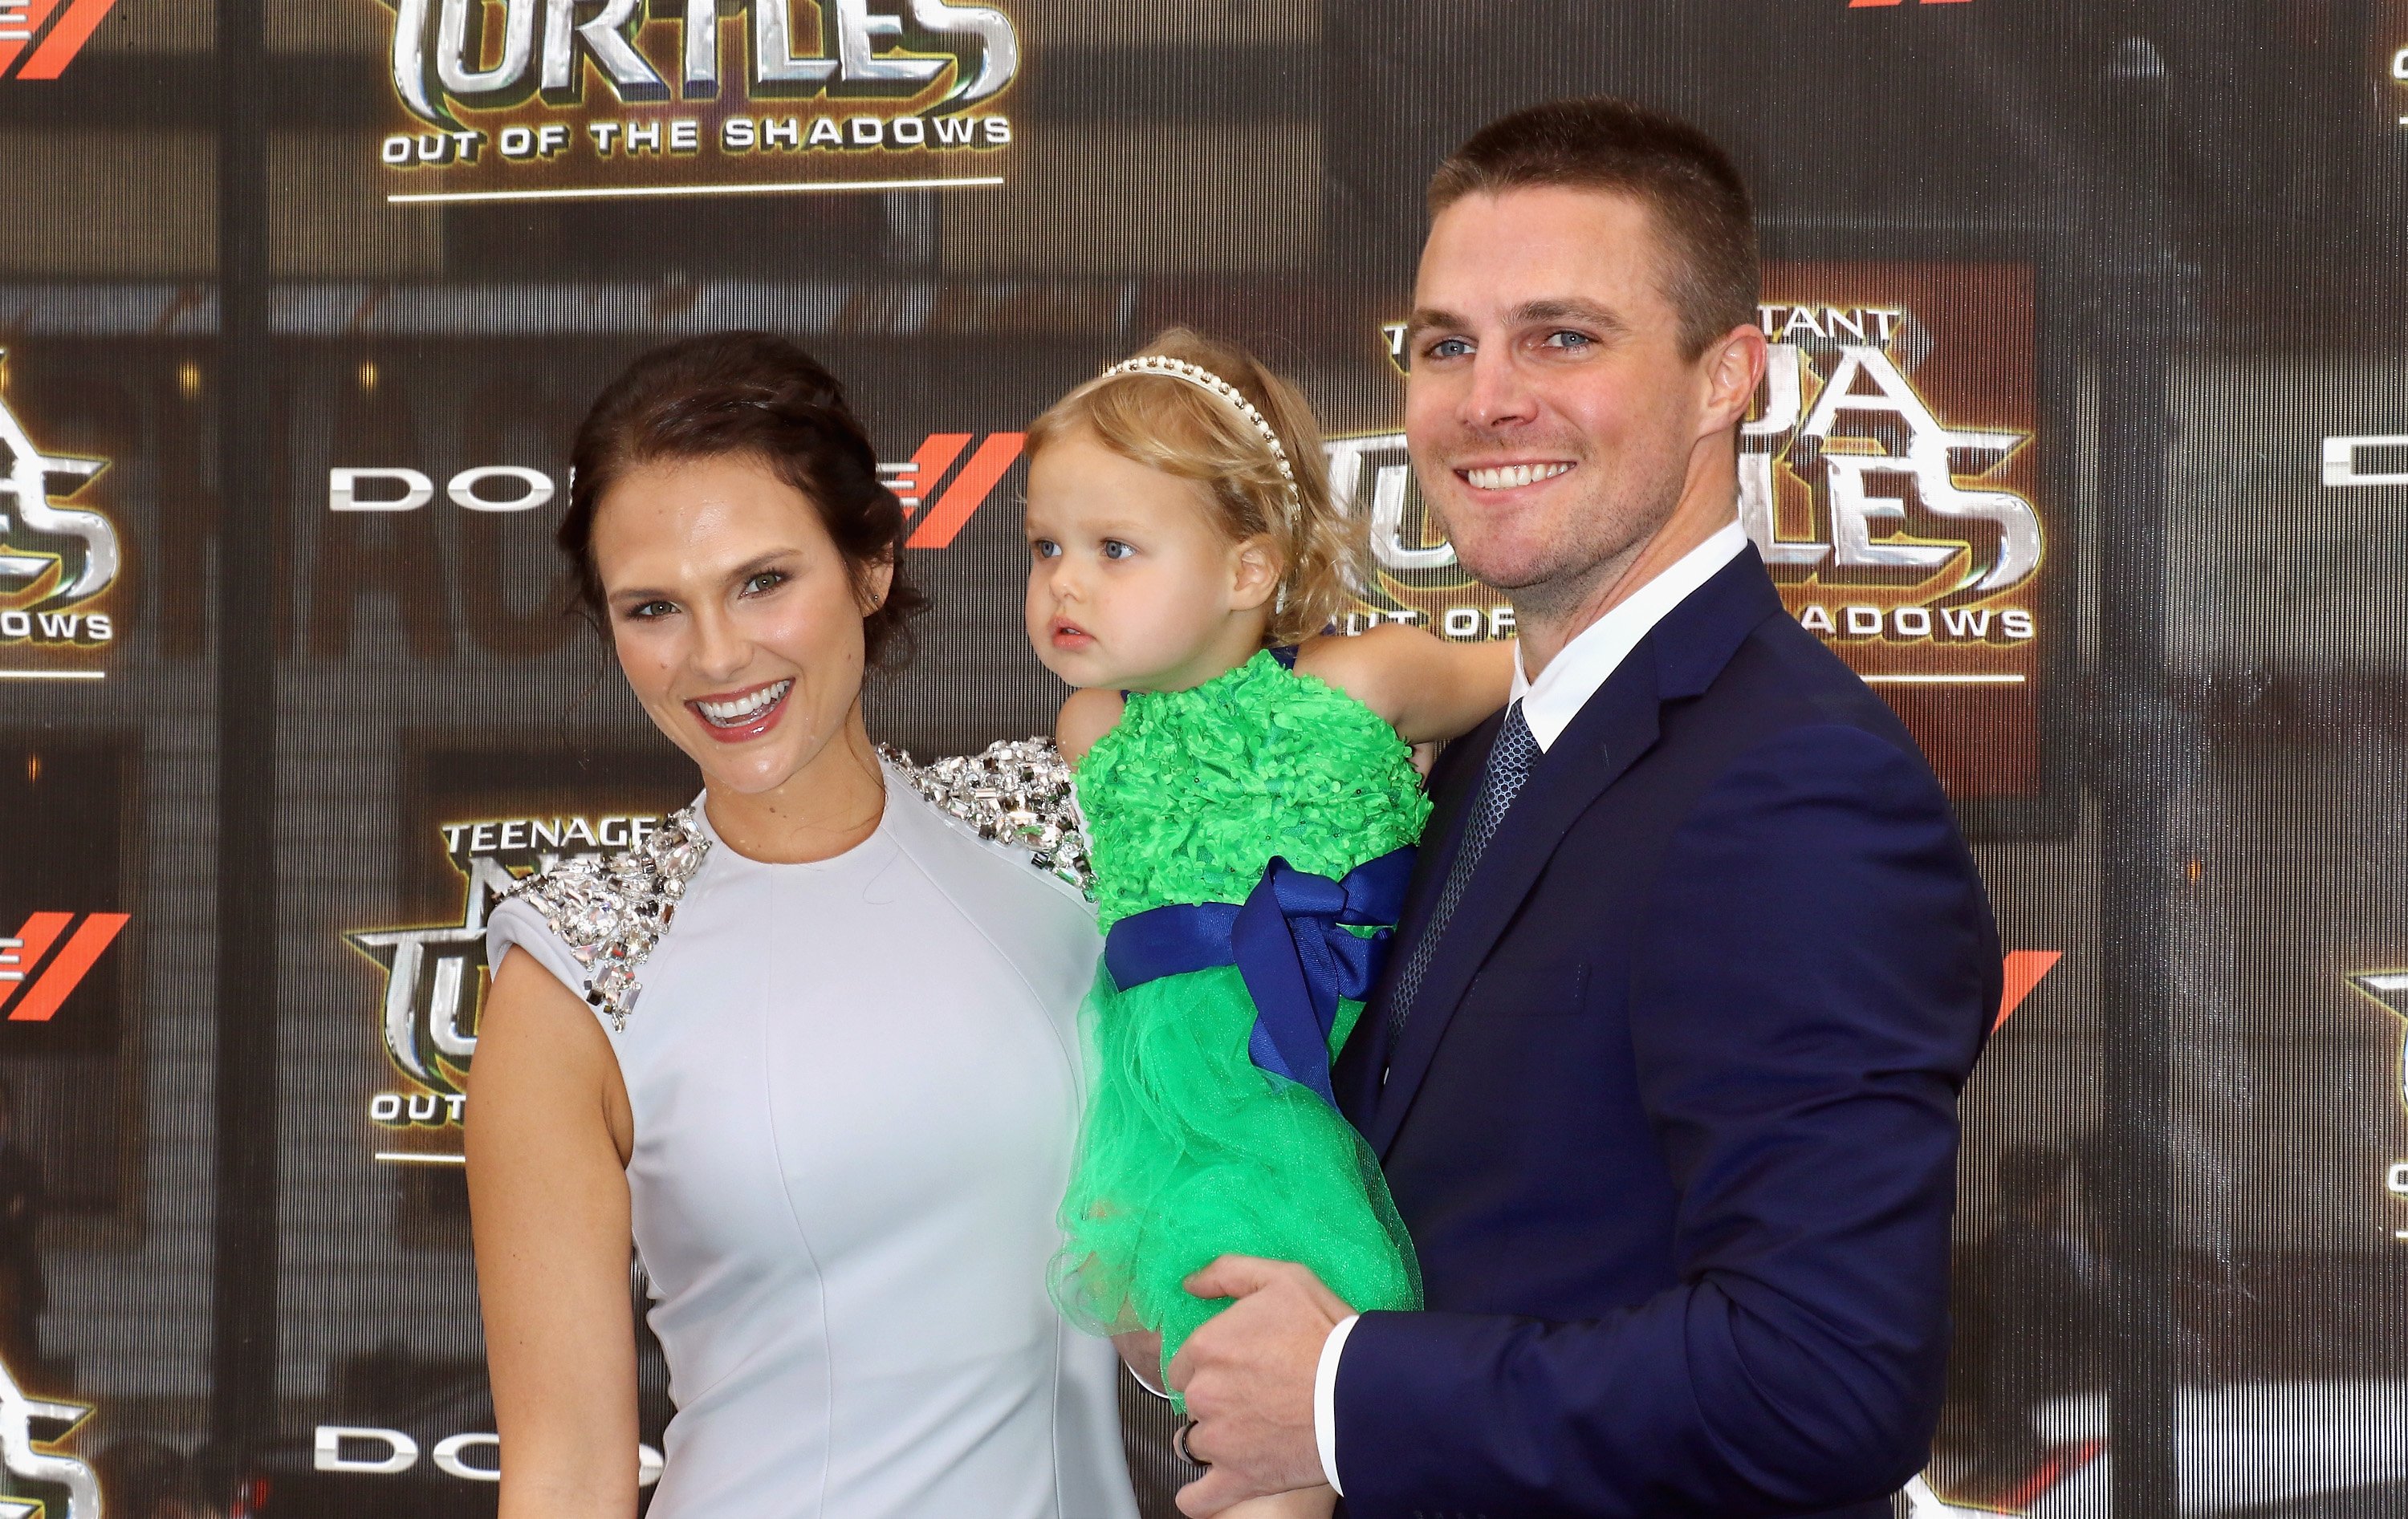 Actress Cassandra Jean, actor Stephen Amell and daughter Mavireck Alexandra Jean Amell attend the "Teenage Mutant Ninja Turtles: Out Of The Shadows" world premiere at Madison Square Garden on May 22, 2016 in New York City. | Source: Getty Images